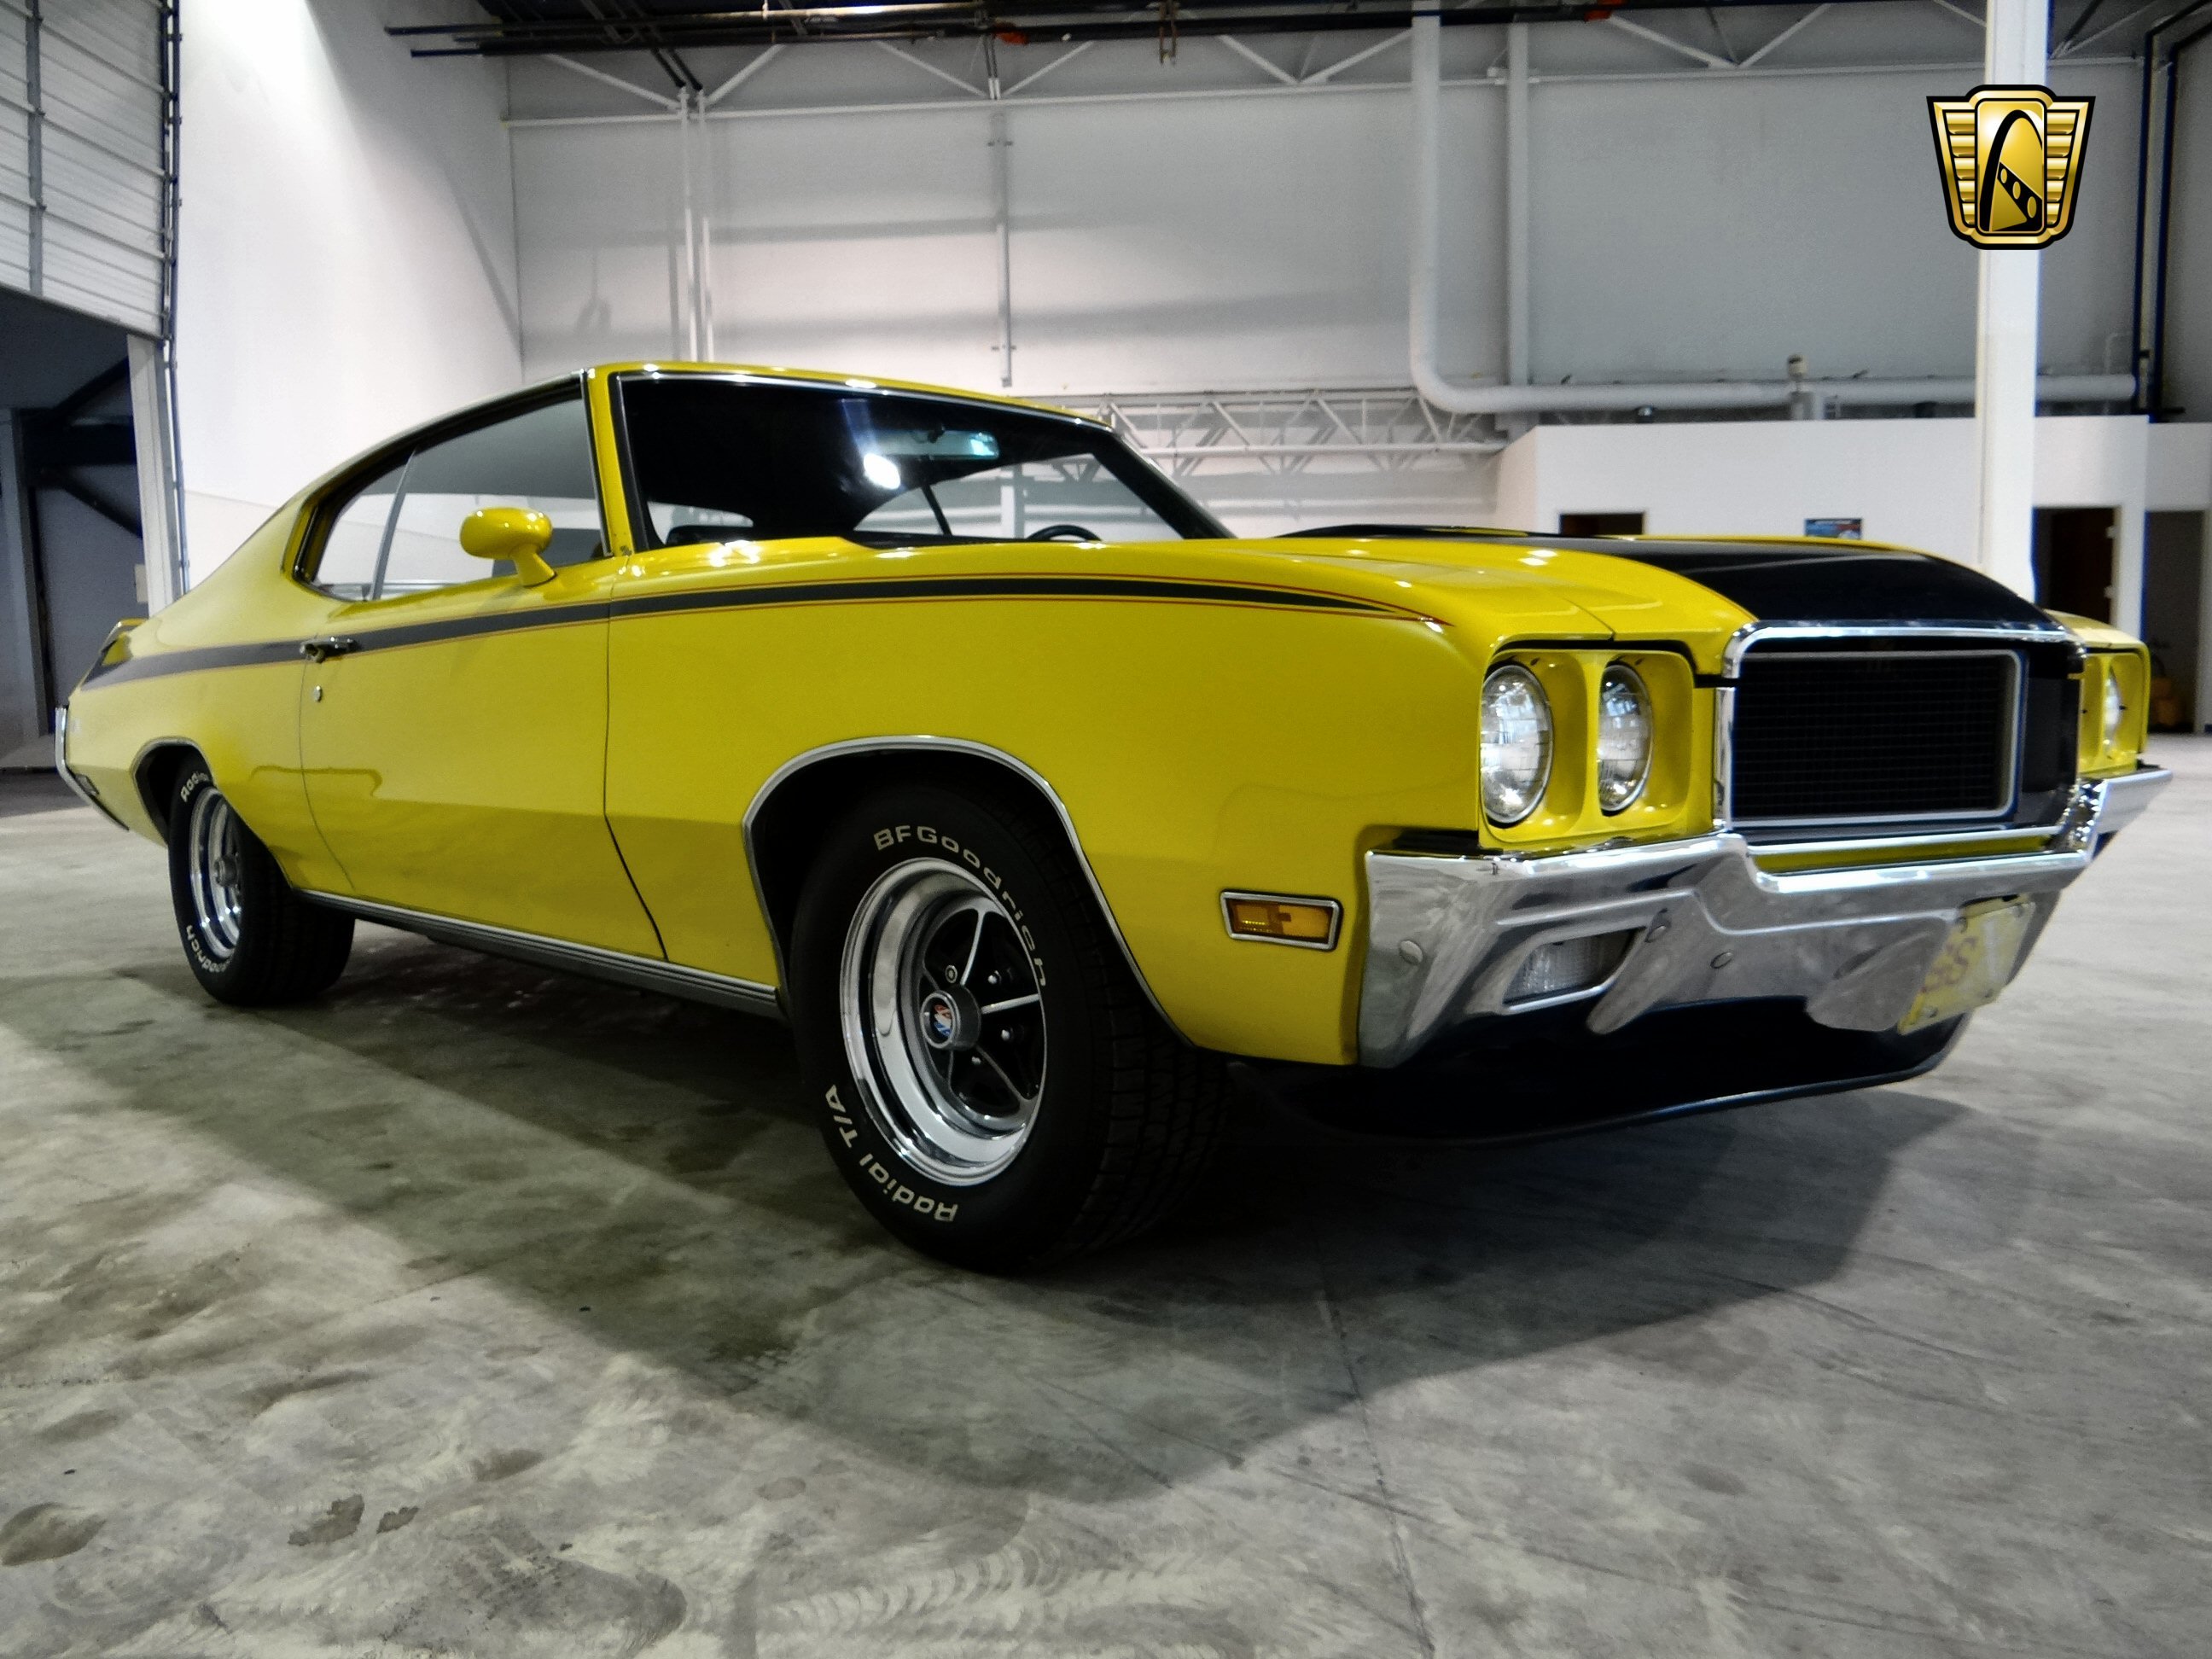 1970, Buick, Gsx, Stage 1, Muscle, Classic,  28 Wallpaper